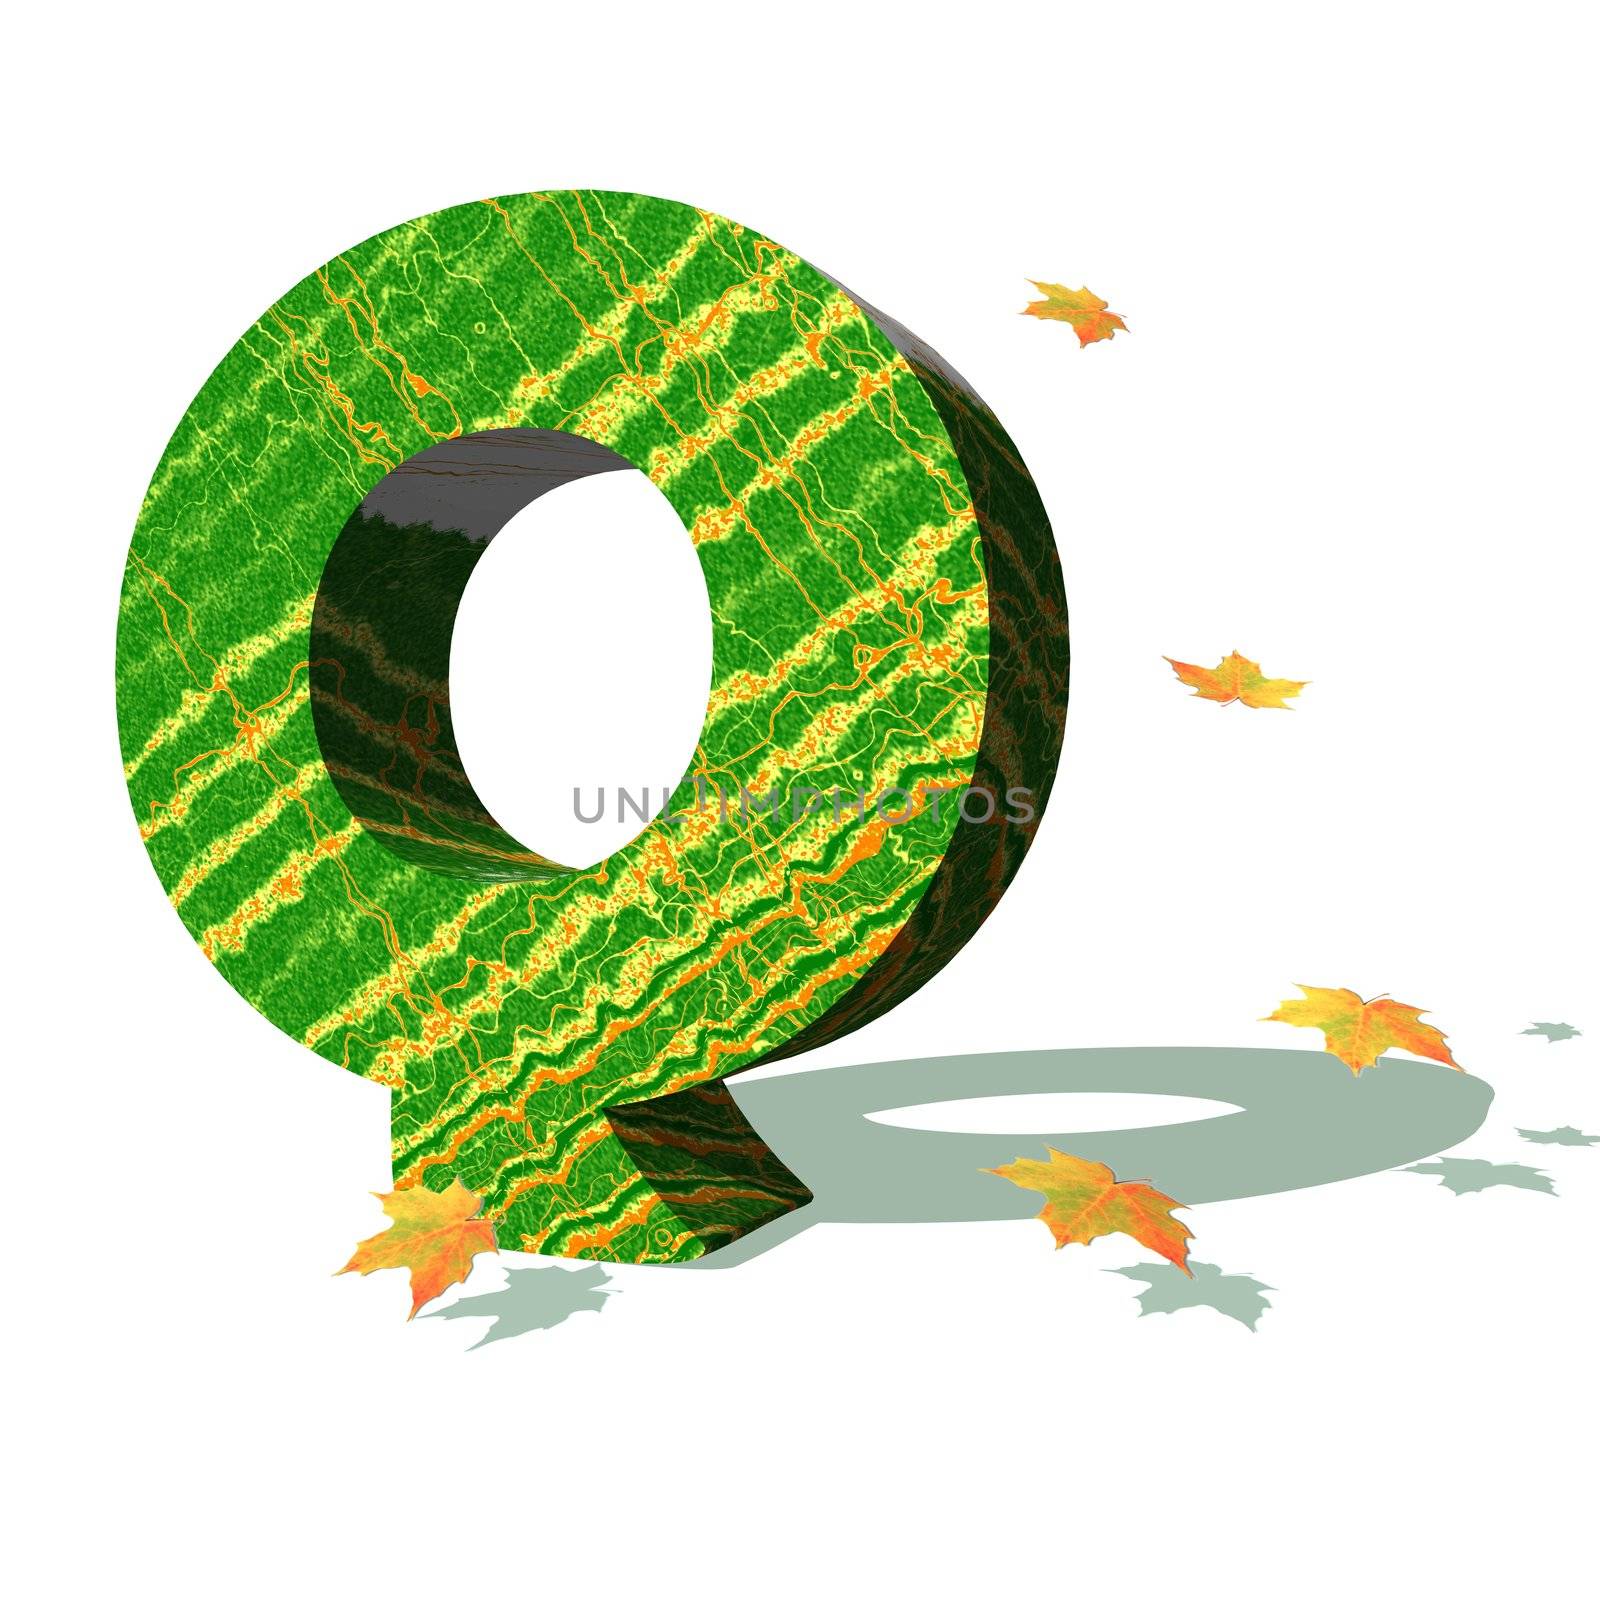 Green ecological Q capital letter surrounded by few autumn falling leaves in a white background with shadows